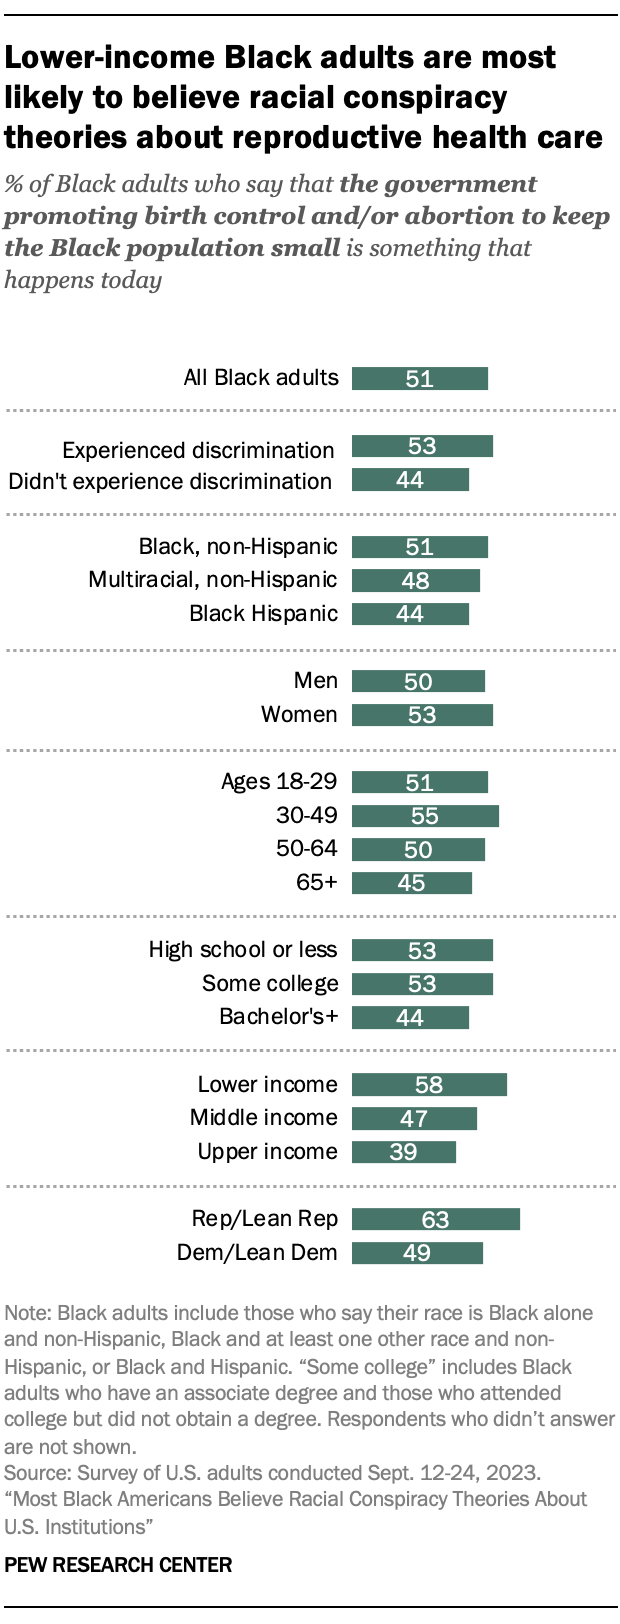 A bar chart showing that Lower-income Black adults are most likely to believe racial conspiracy theories about reproductive health care